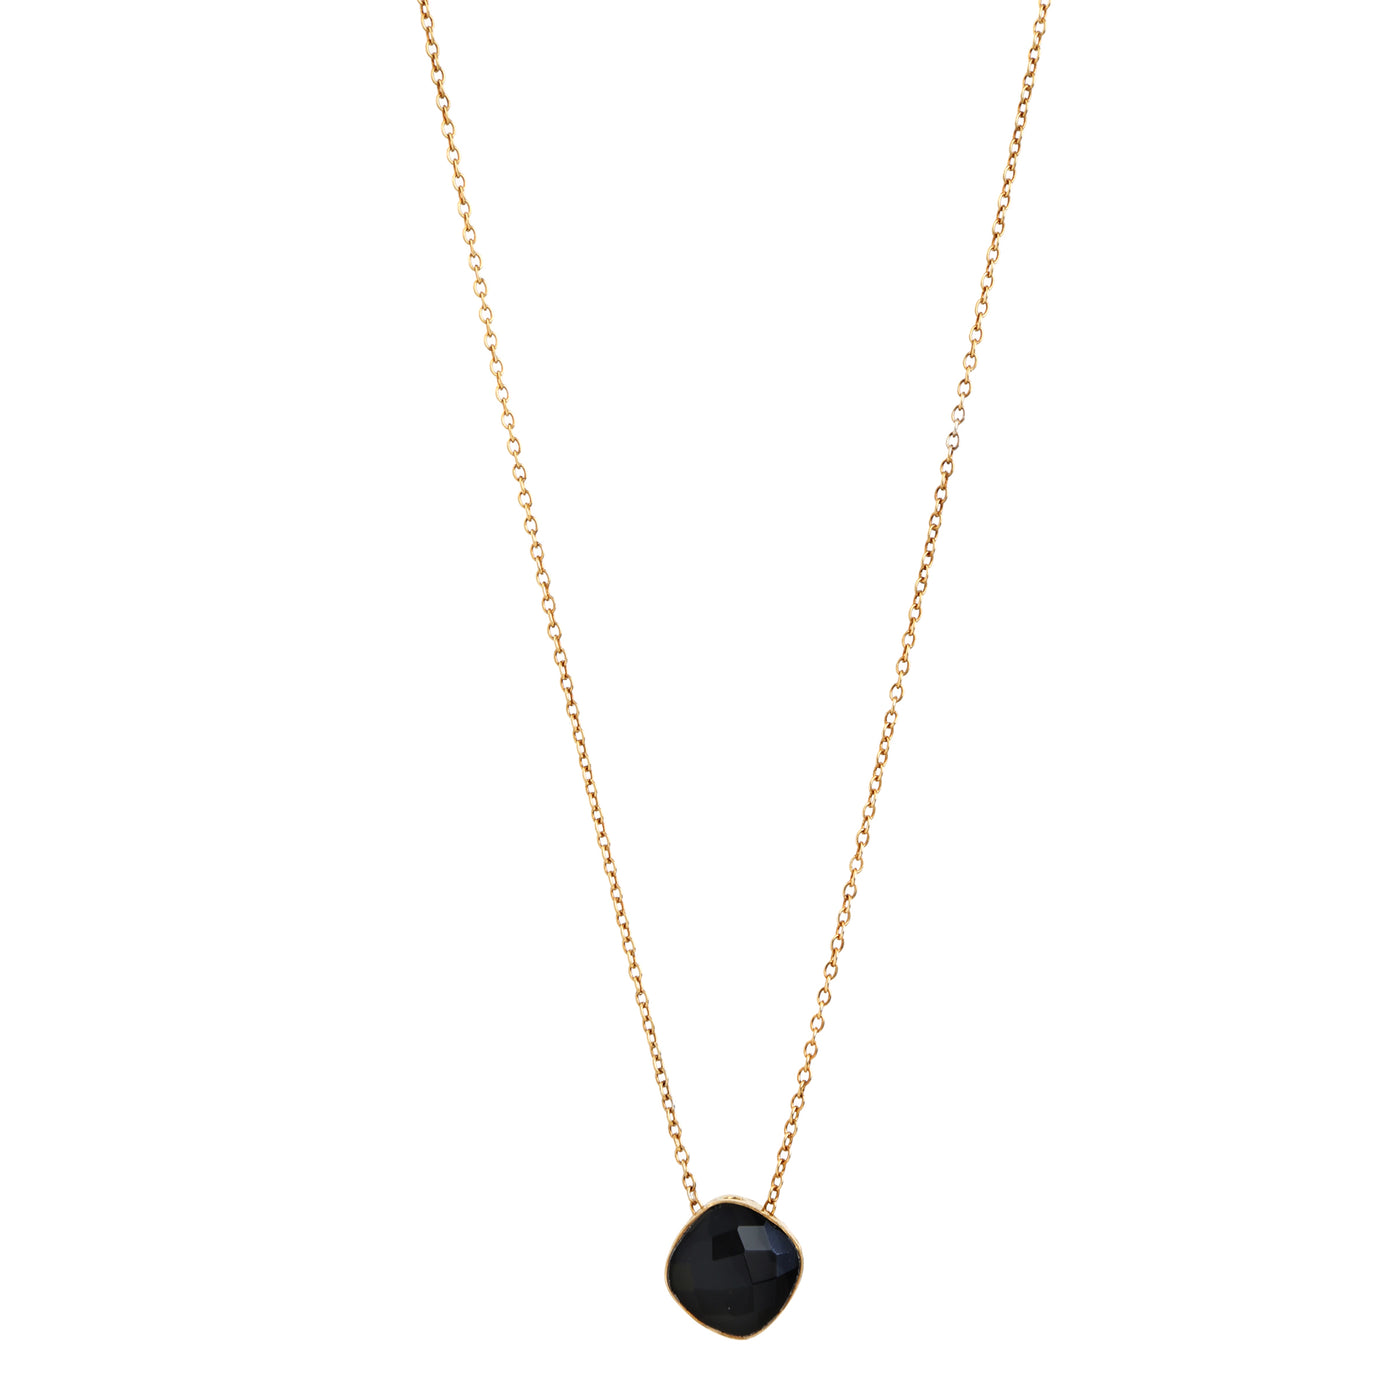 Ishore necklace handcrafted with black onyx